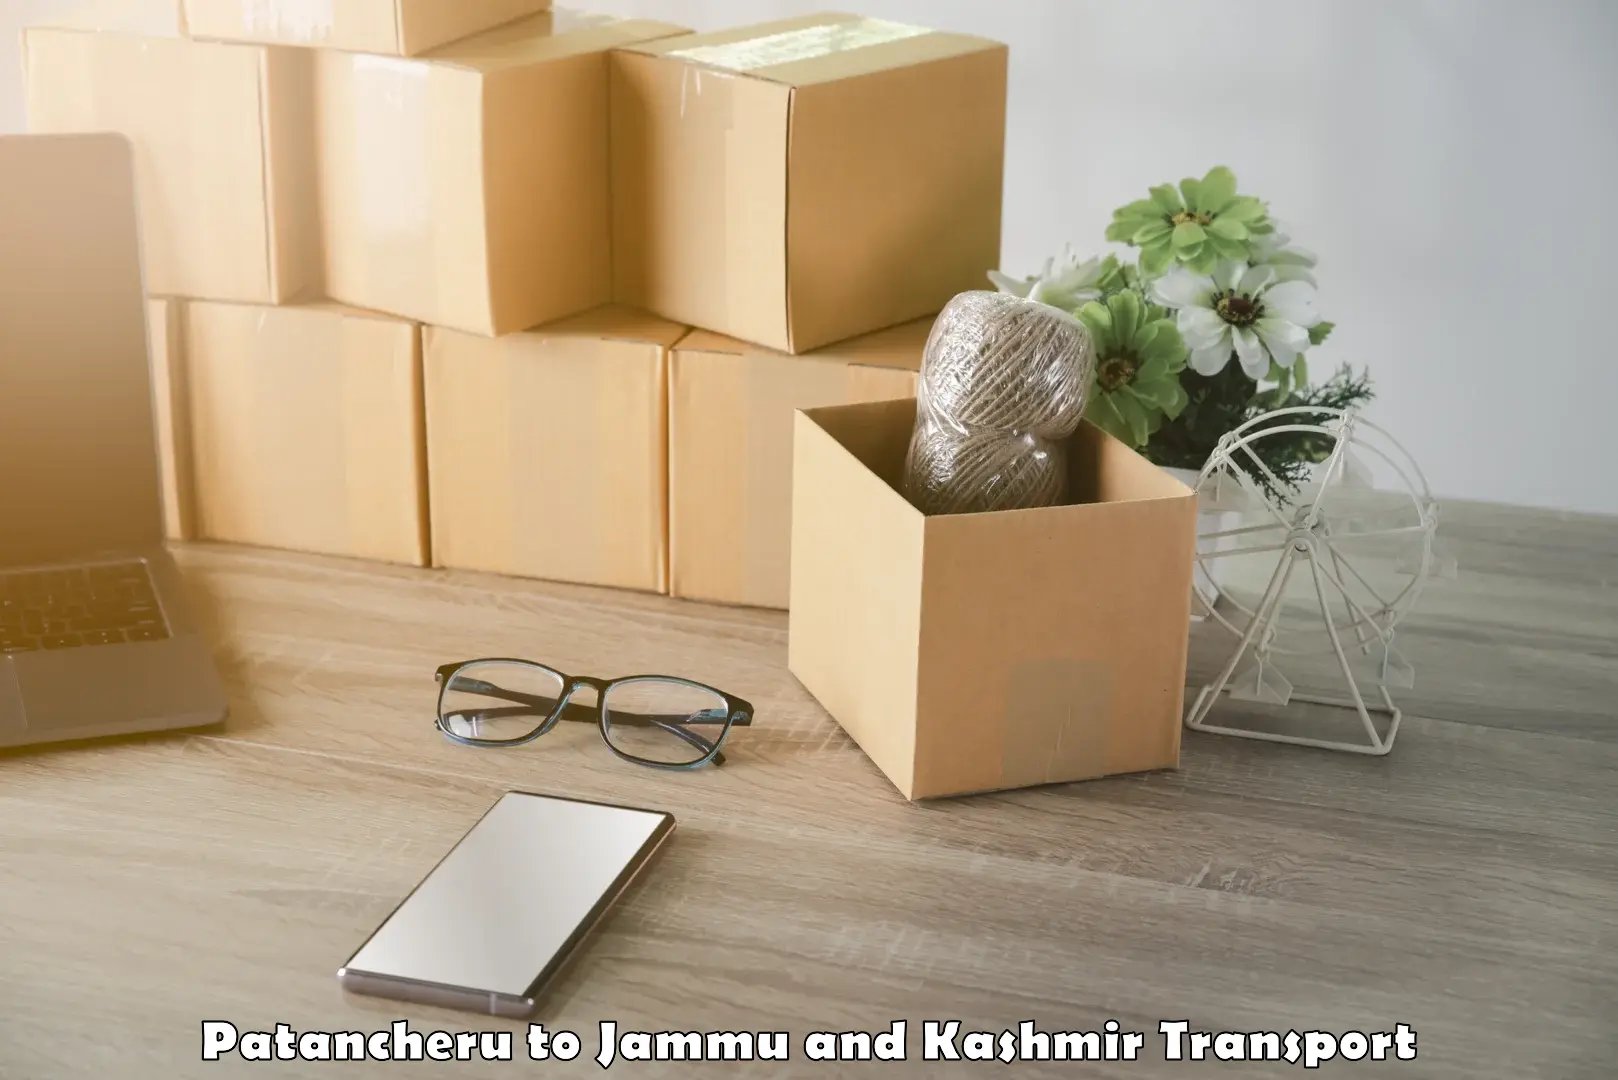 Daily parcel service transport in Patancheru to Baramulla